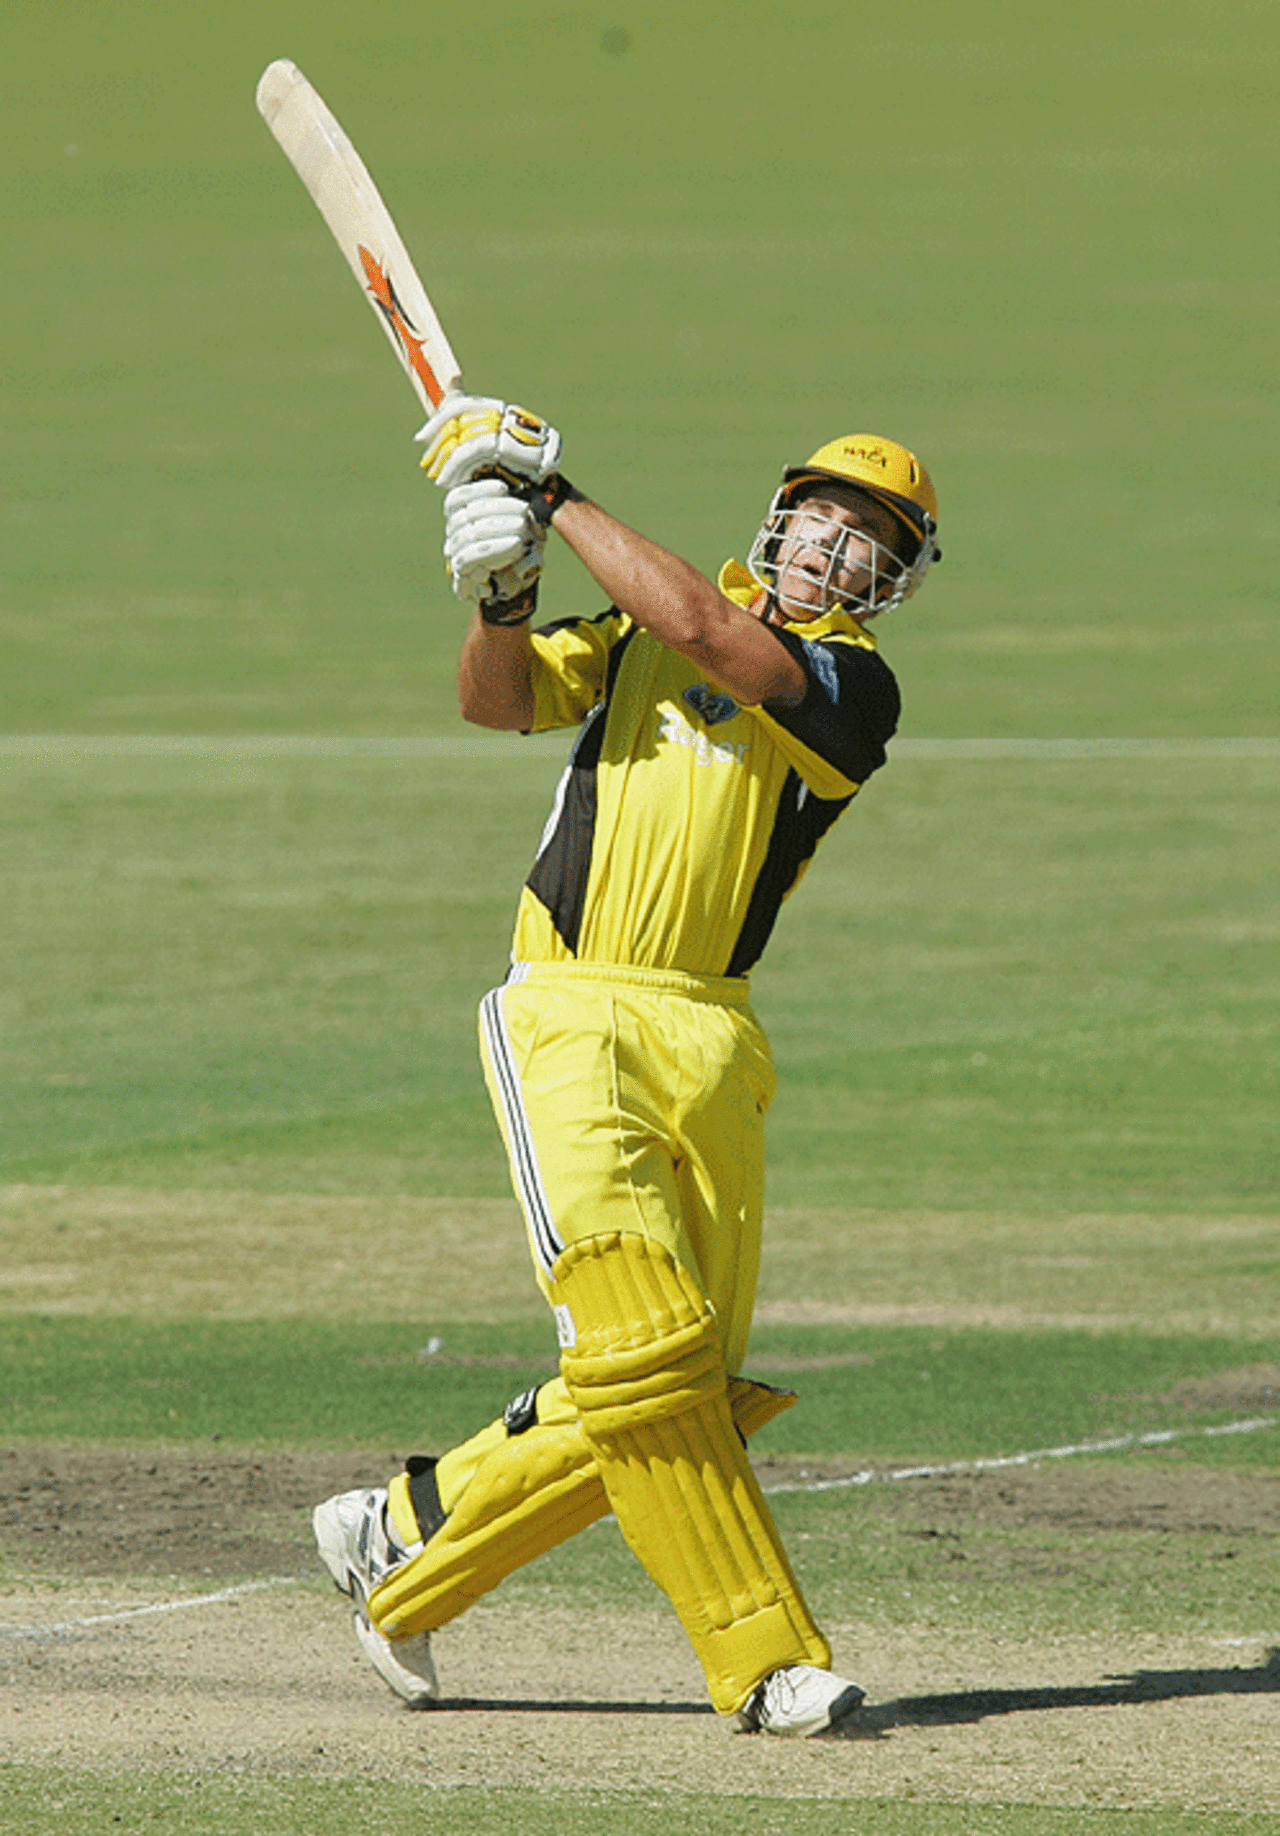 Luke Pomersbach goes aerial against South Australia, South Australia v Western Australia, Ford Ranger One Day Cup, Adelaide, February 3, 2007